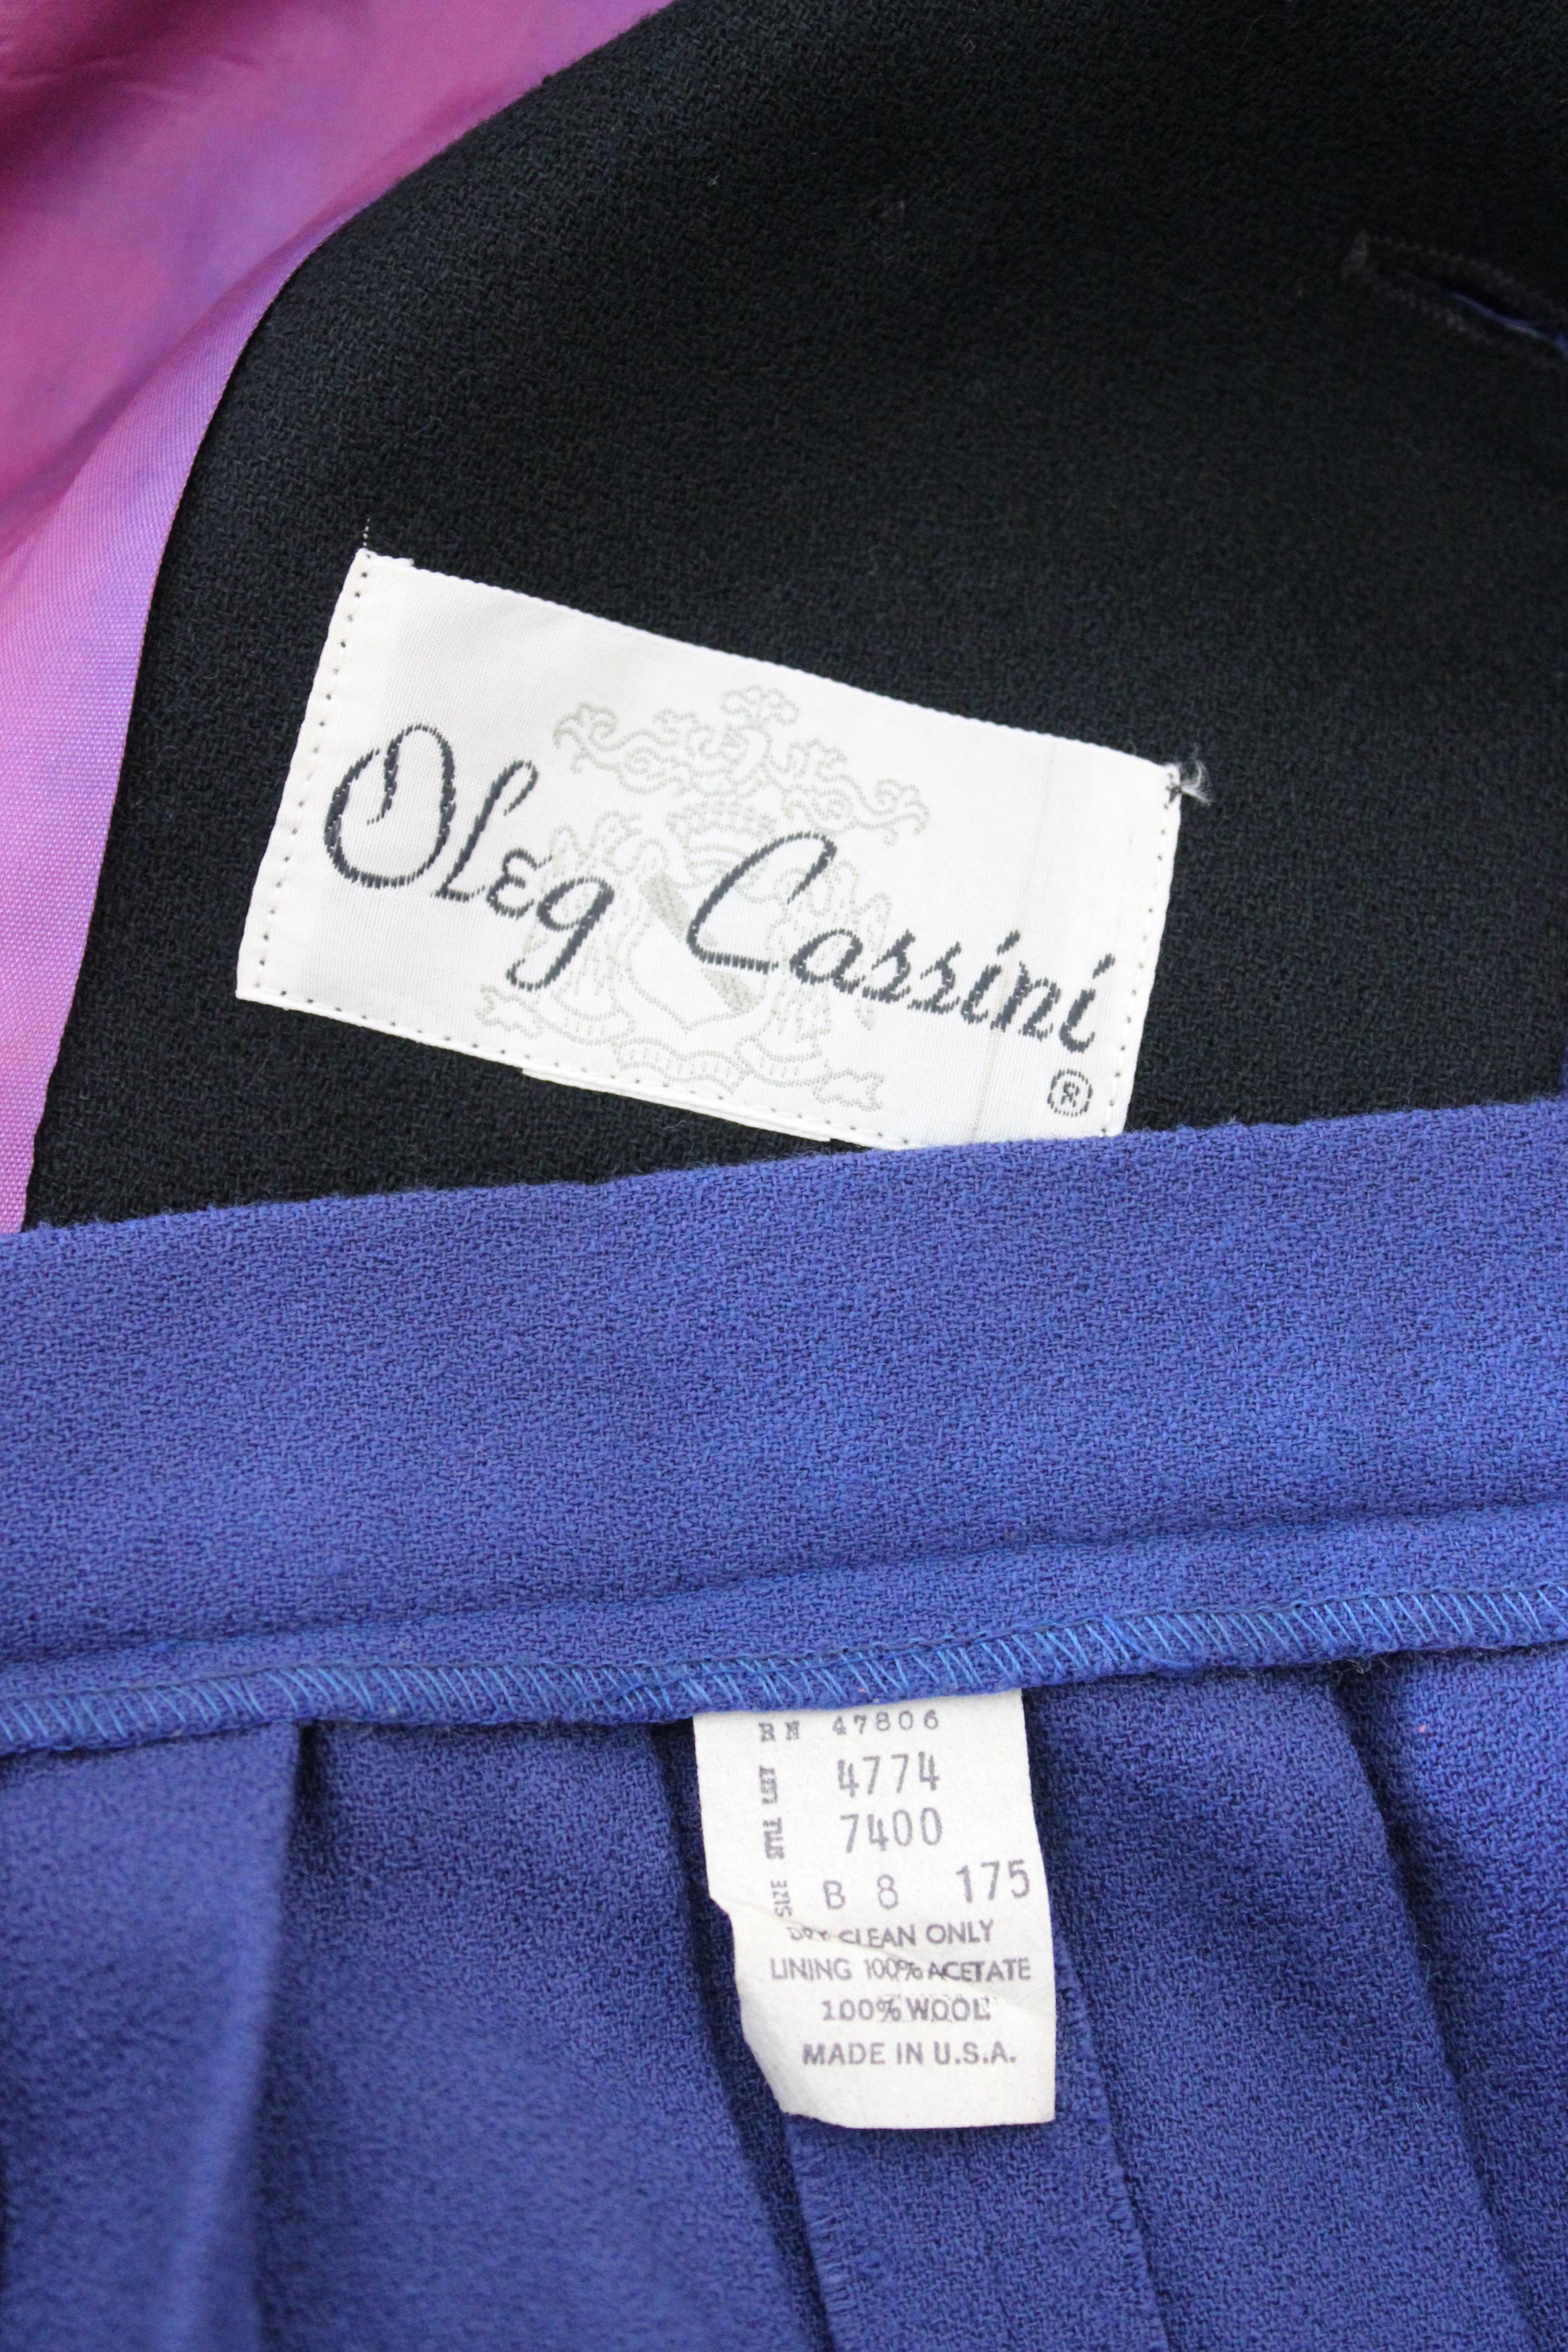 Oleg Cassini vintage 90s suit skirt. Elegant woman suit consisting of jacket and skirt. Classic blue jacket with reverse and black buttons. Blue pleated skirt. 100% wool fabric. Made in the USA.

Condition: Very good

Item in excellent condition.